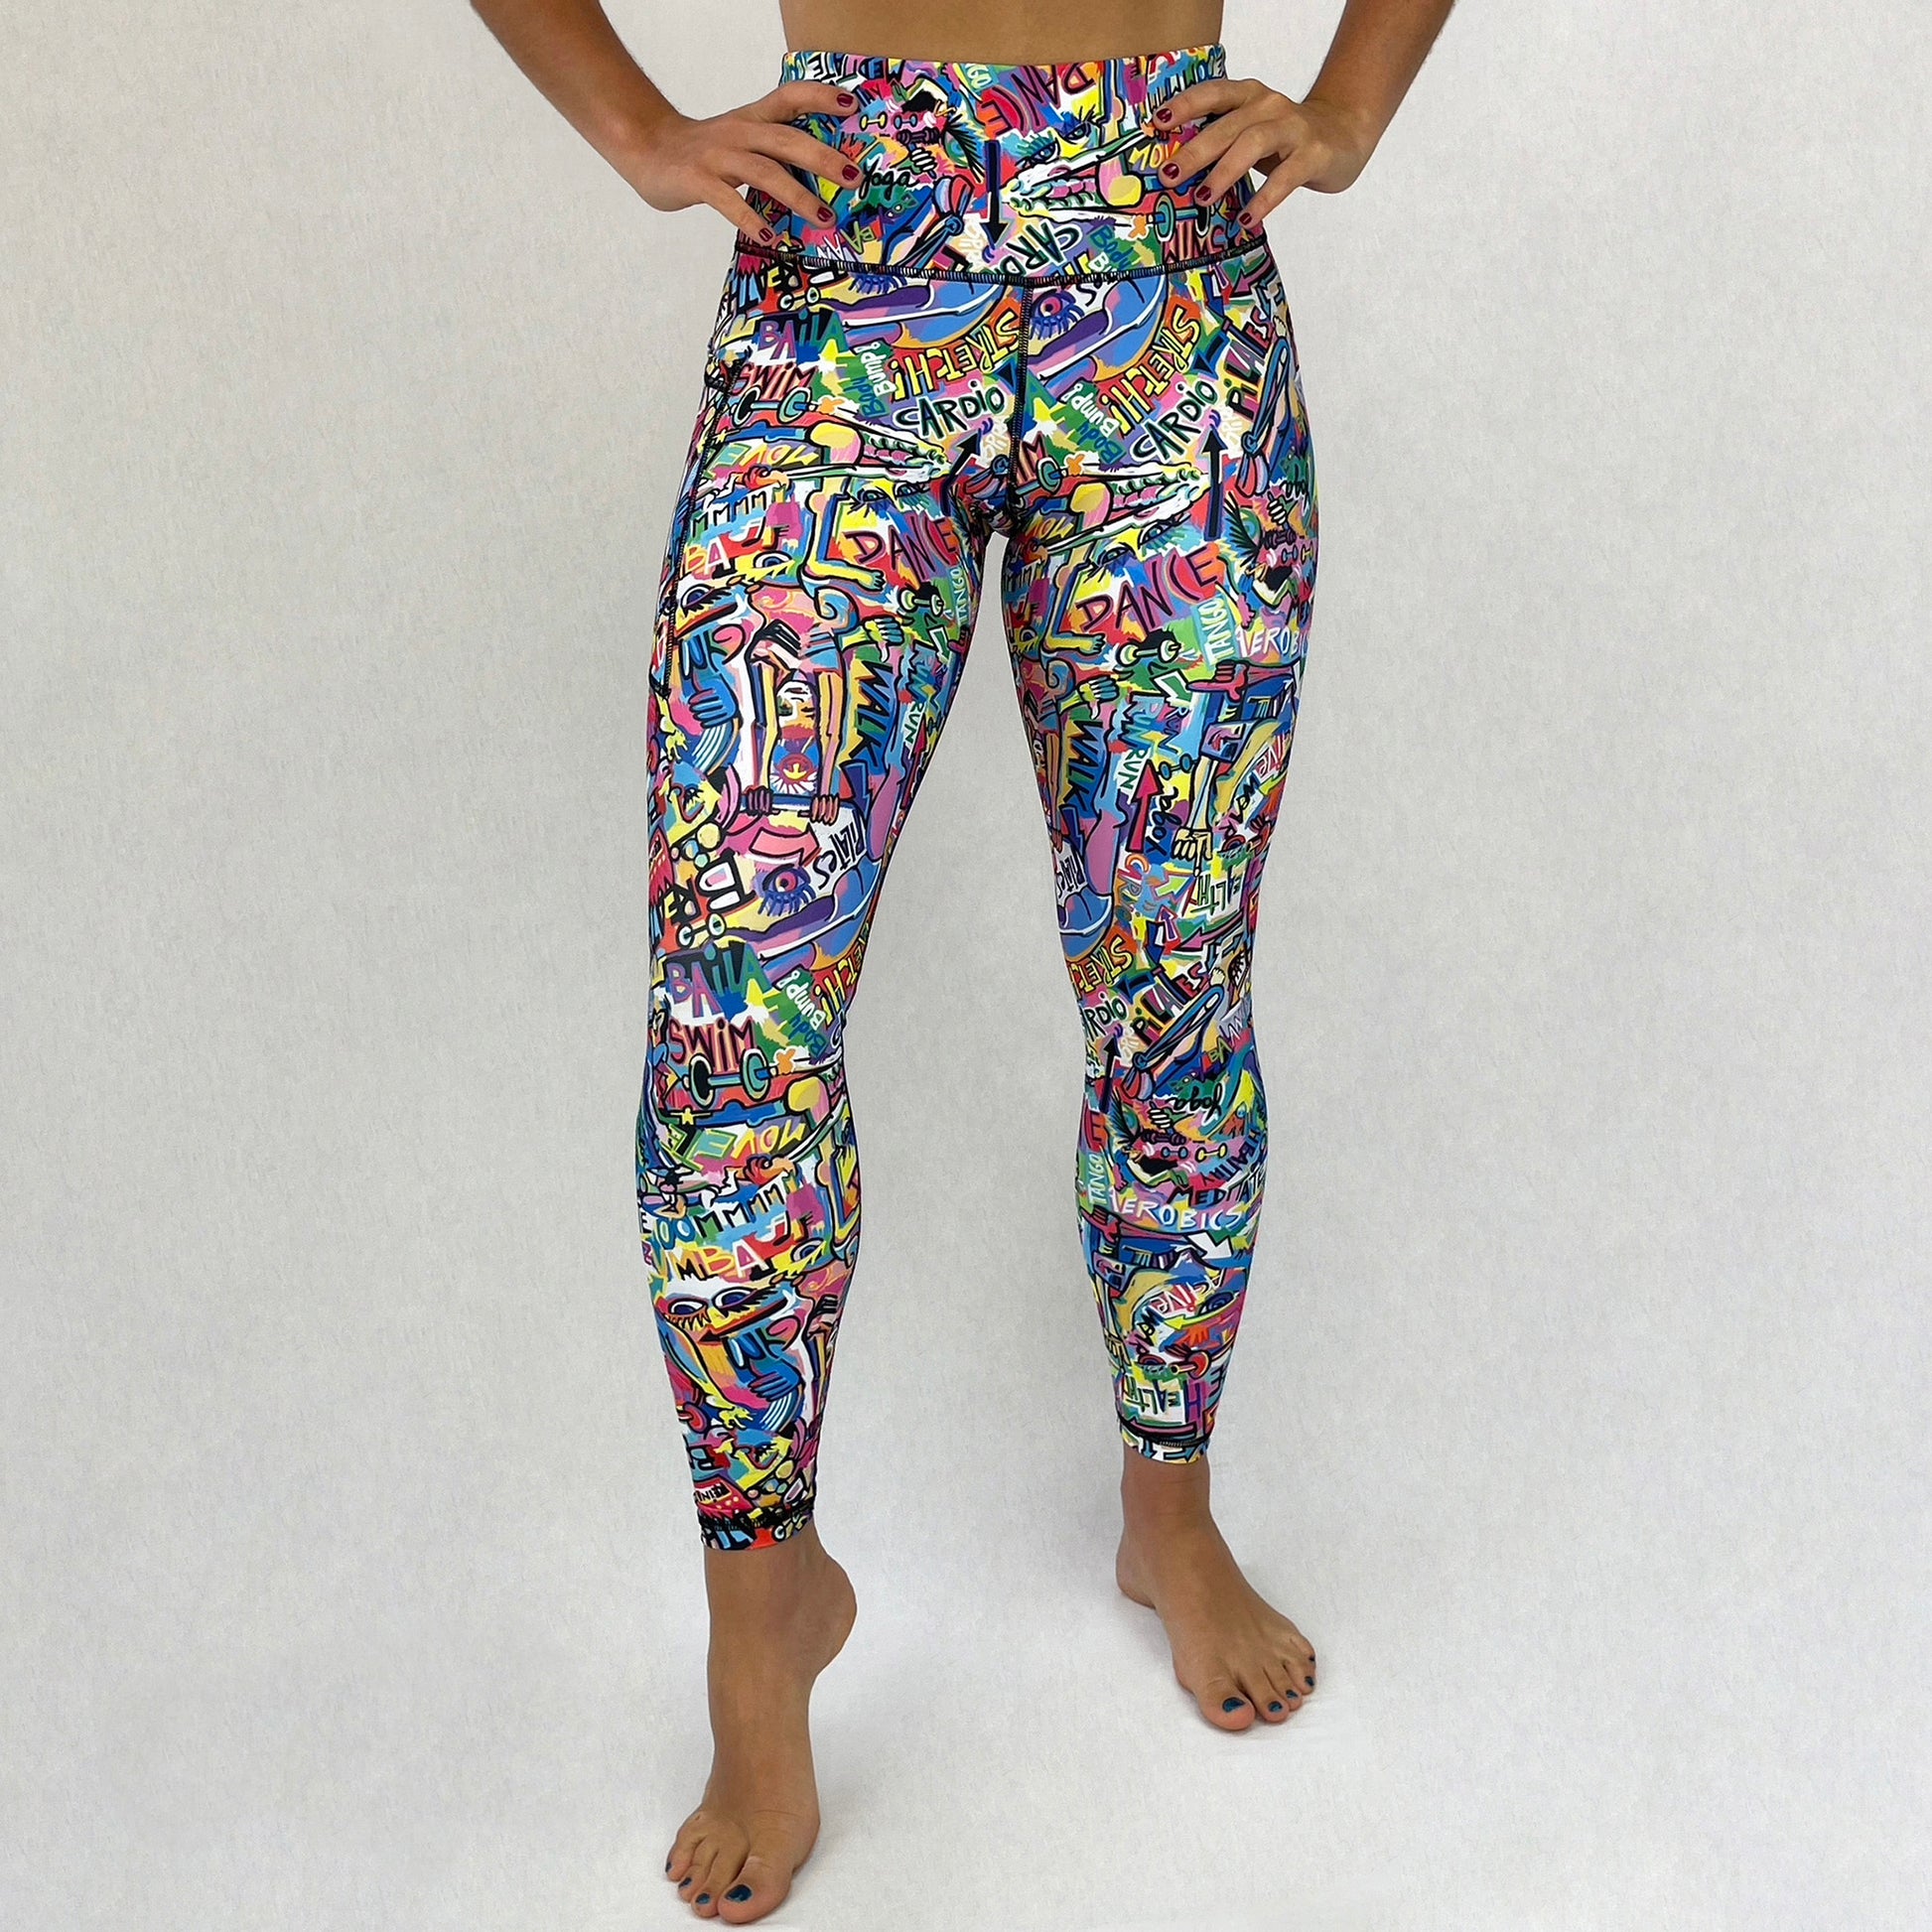 Ethical High Waisted Leggings Art2Go Doodlz by Monique Baques front